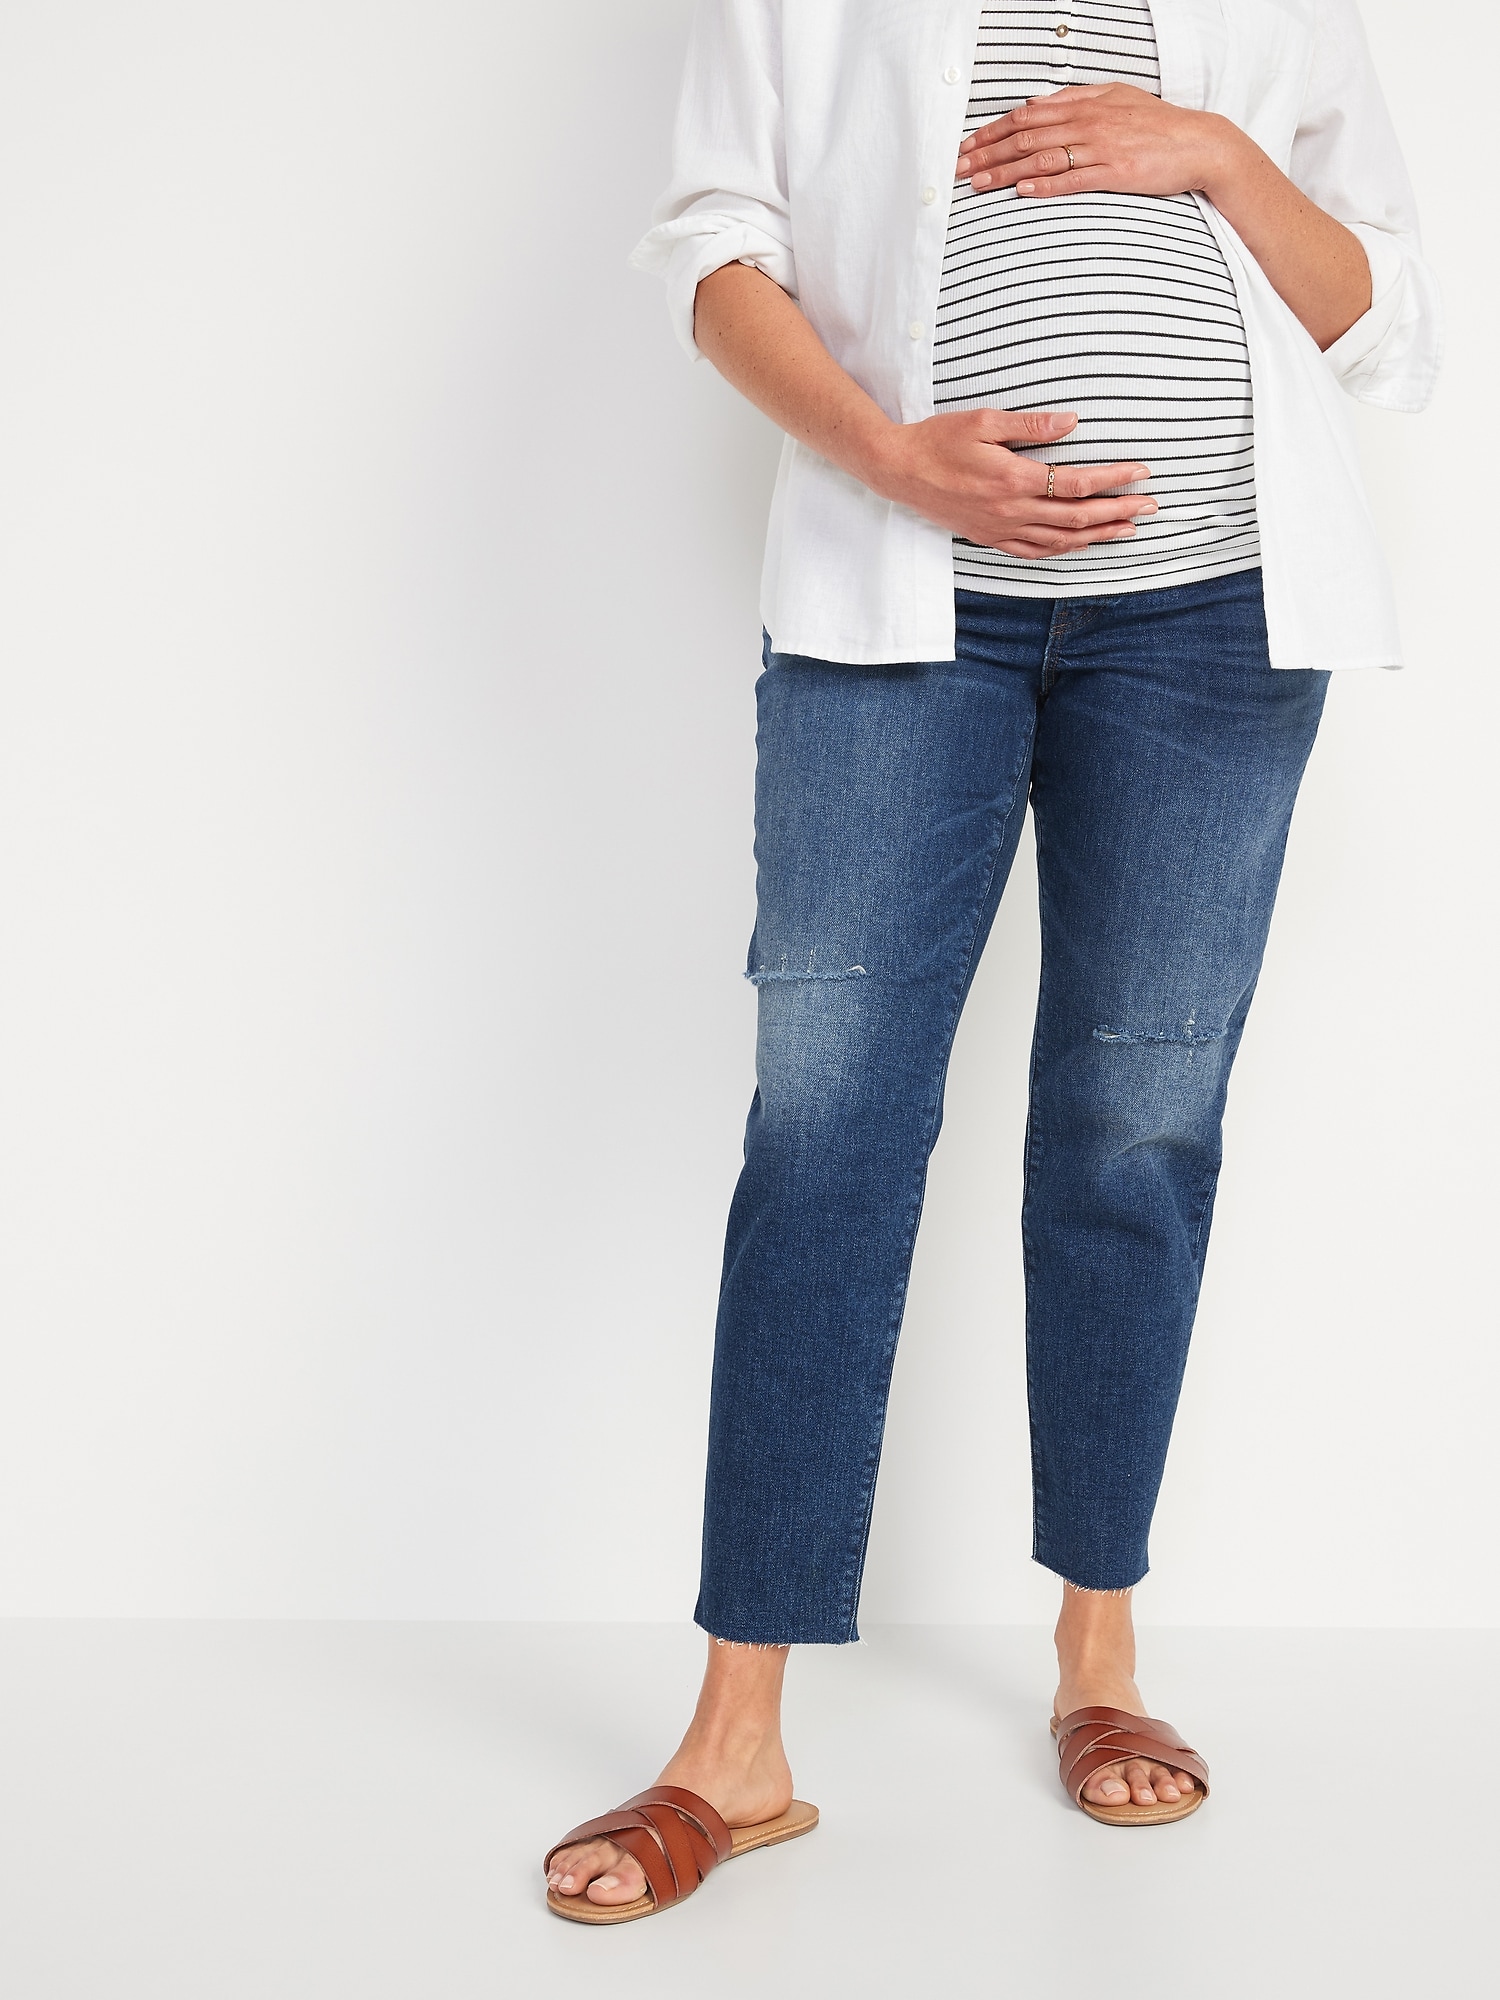 Maternity Full Panel O.G. Straight Ripped Cut-Off Jeans